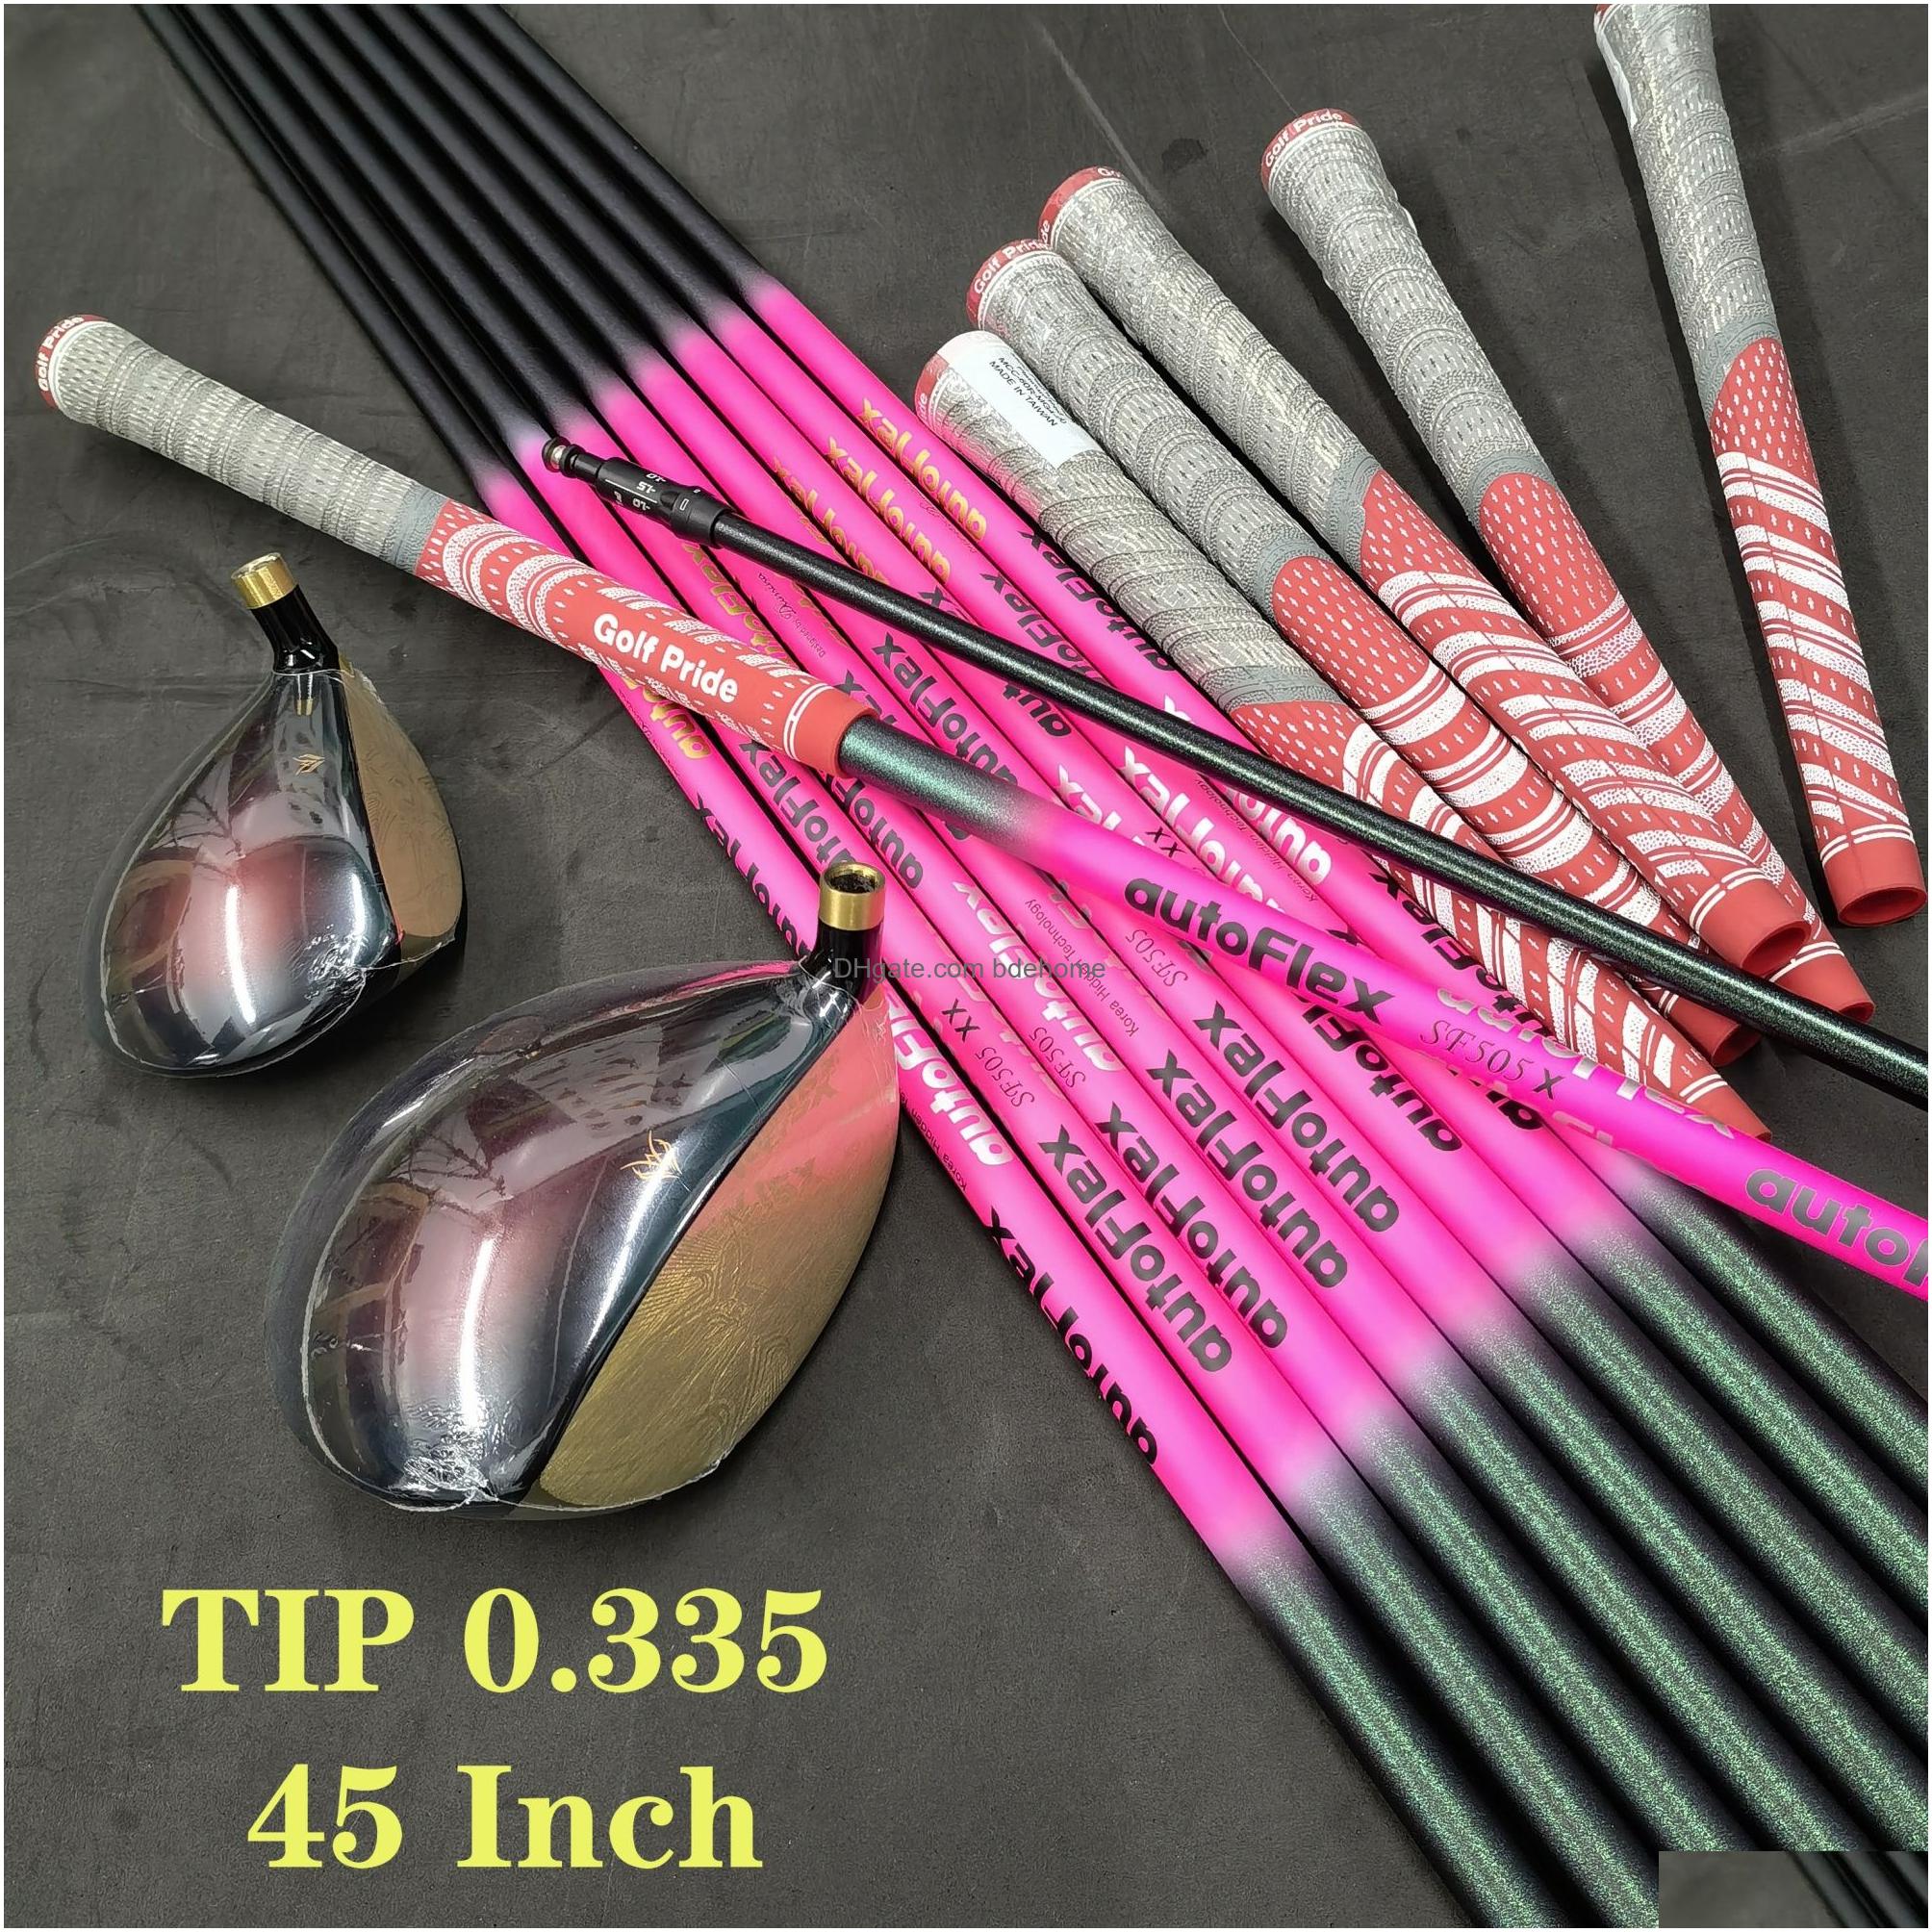 Drivers Golf Shaft Flex Driver Sf505/Sf505X/Sf505Xx Flex Graphite Wood Assembly Sleeve And Grip Drop Delivery Sports Outdoors Golf Gol Dh6J2